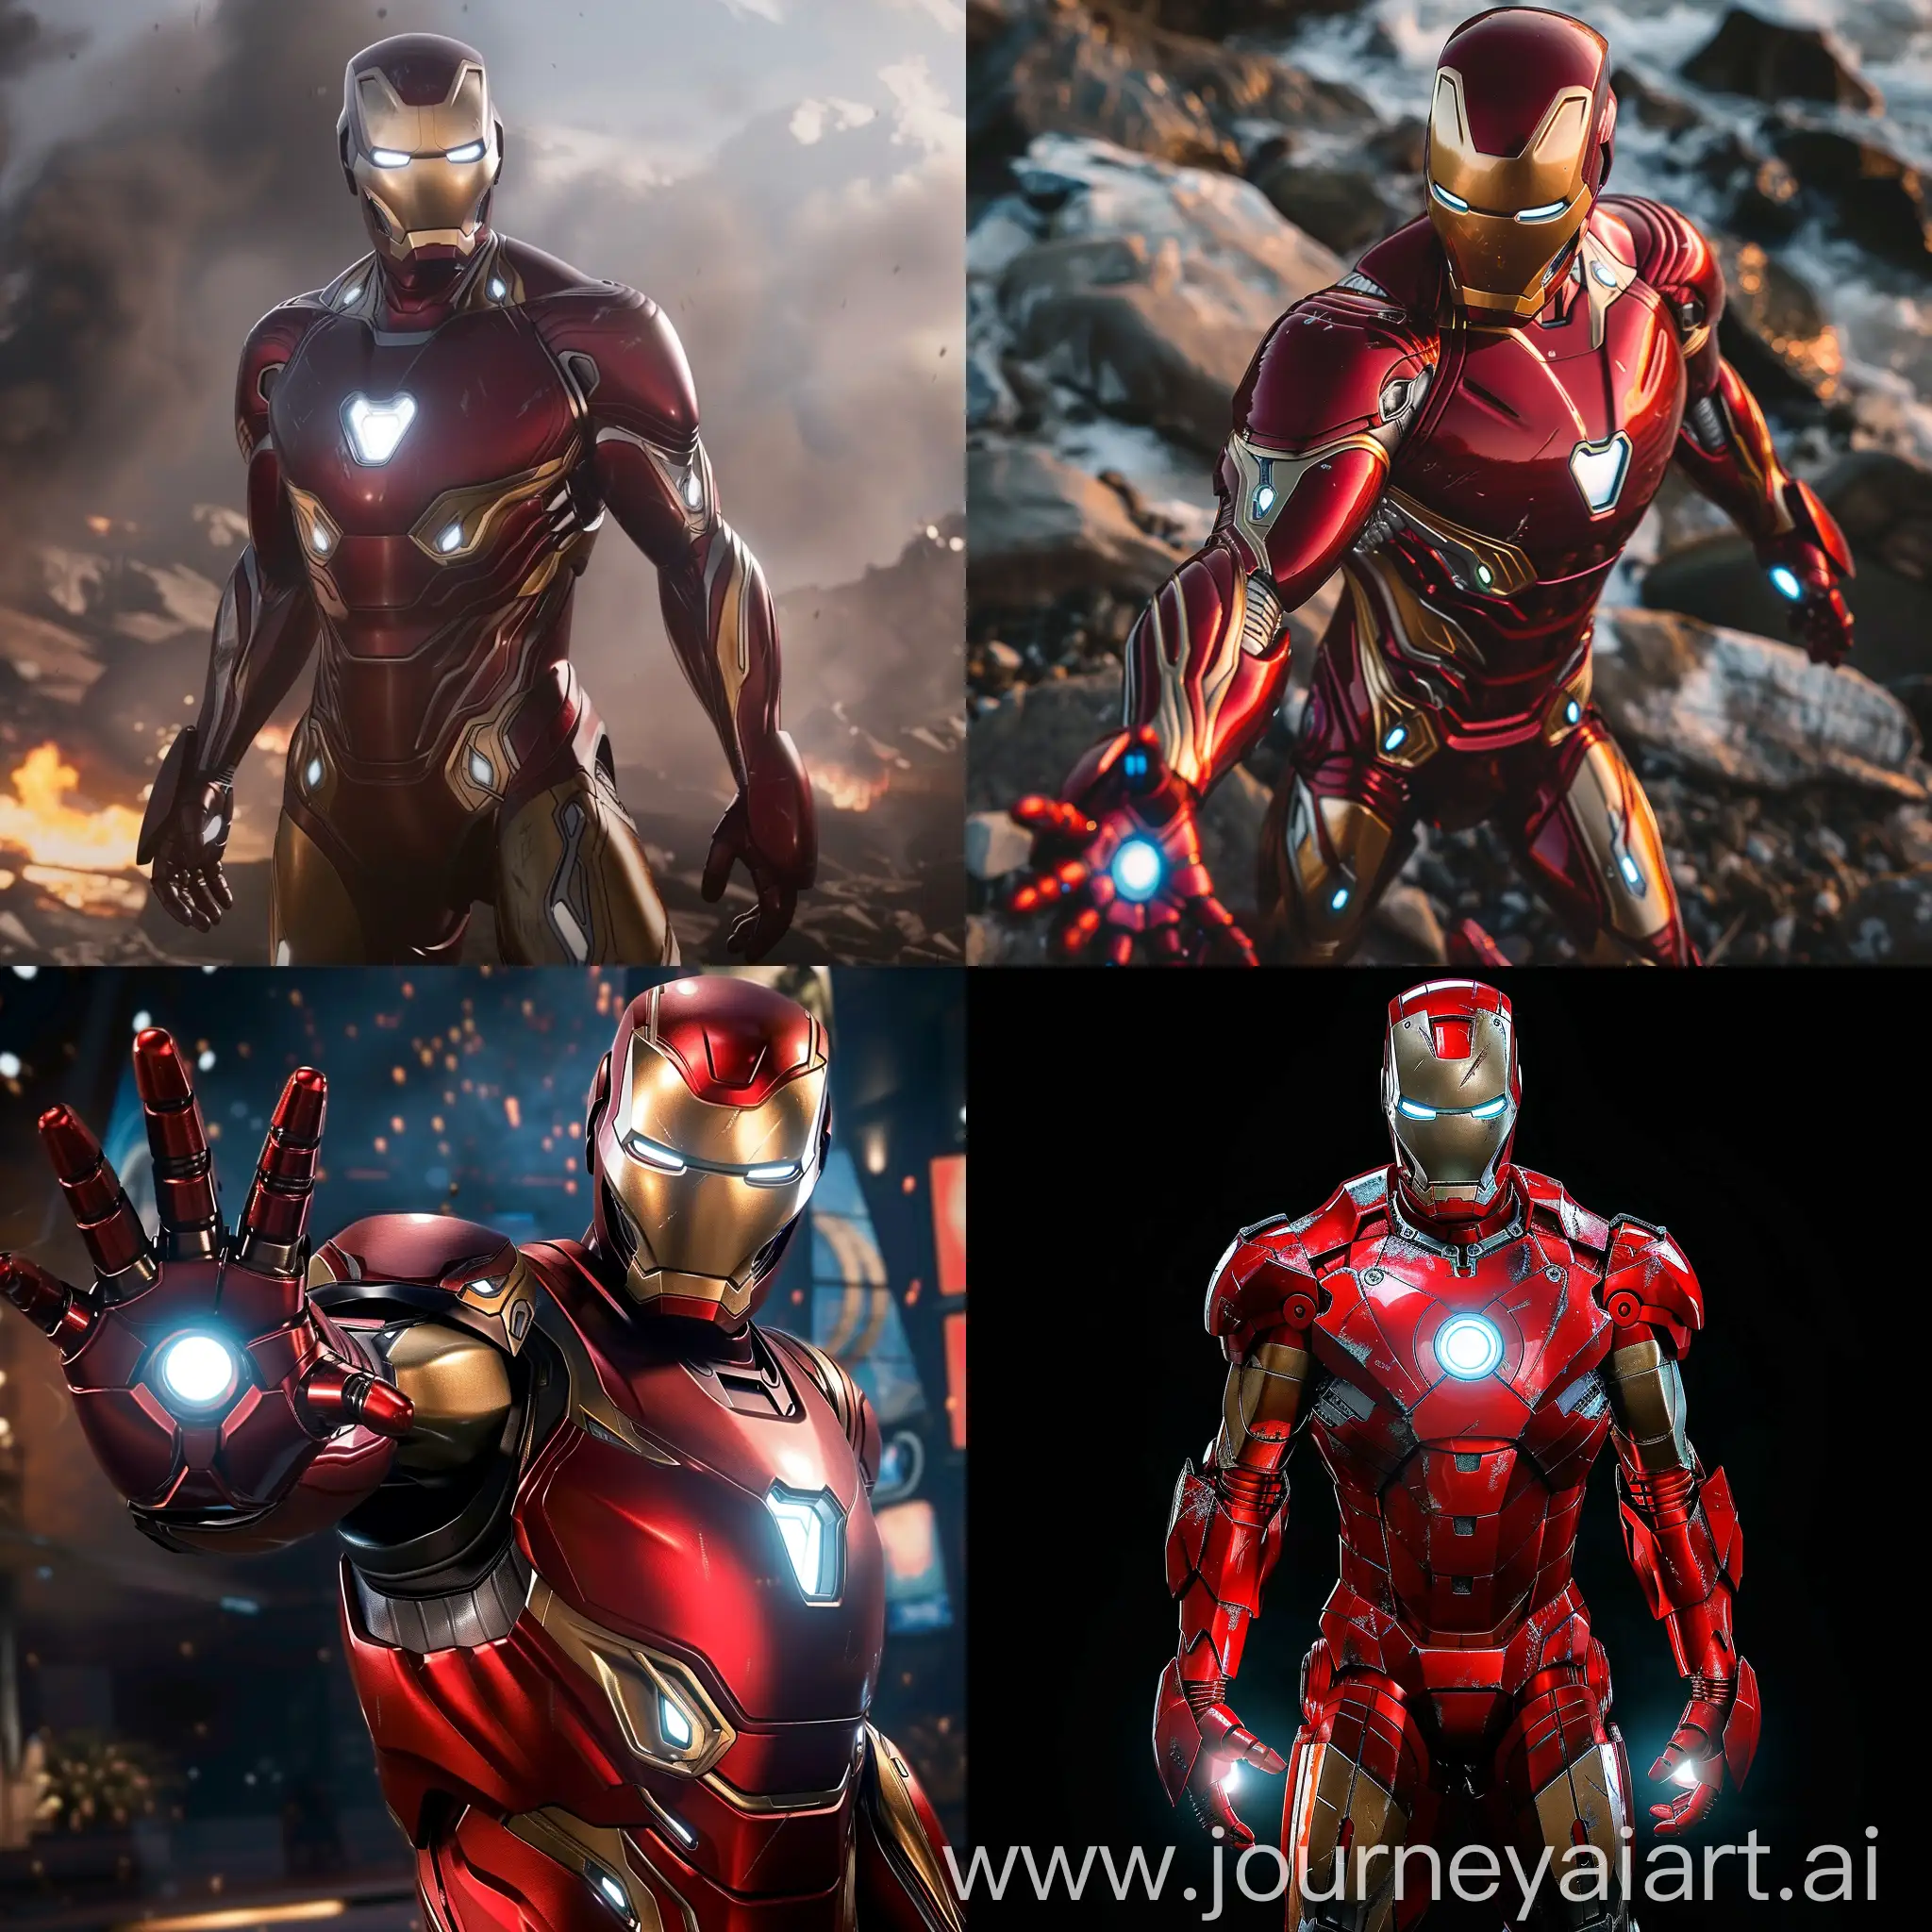 Iron-Man-Suit-Model-v6-Displayed-in-Museum